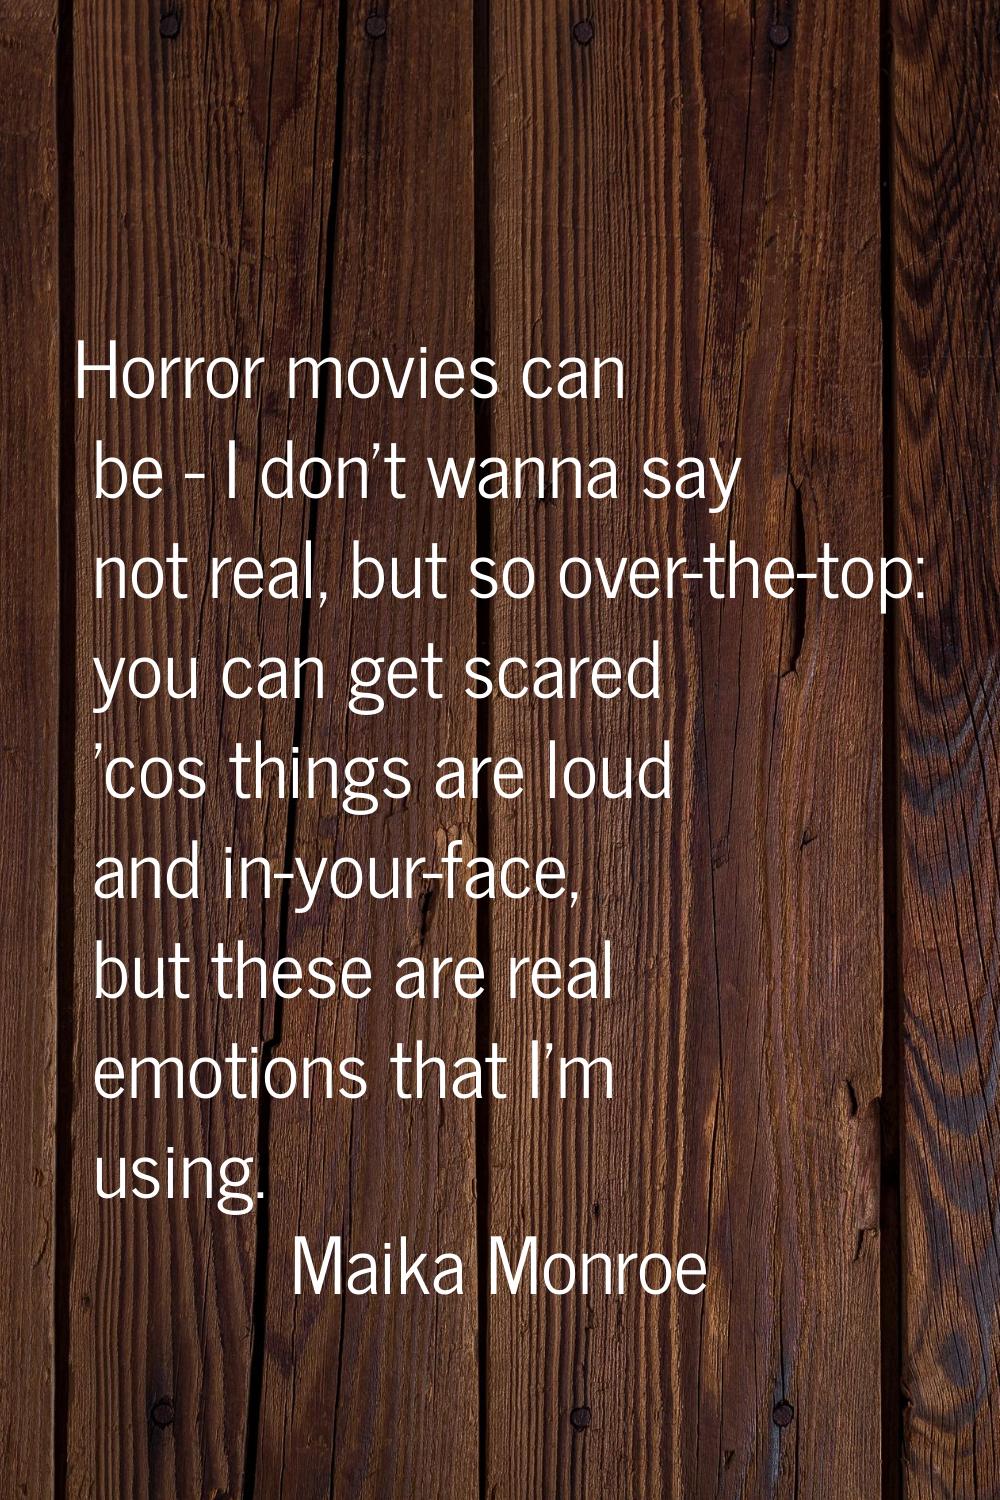 Horror movies can be - I don't wanna say not real, but so over-the-top: you can get scared 'cos thi